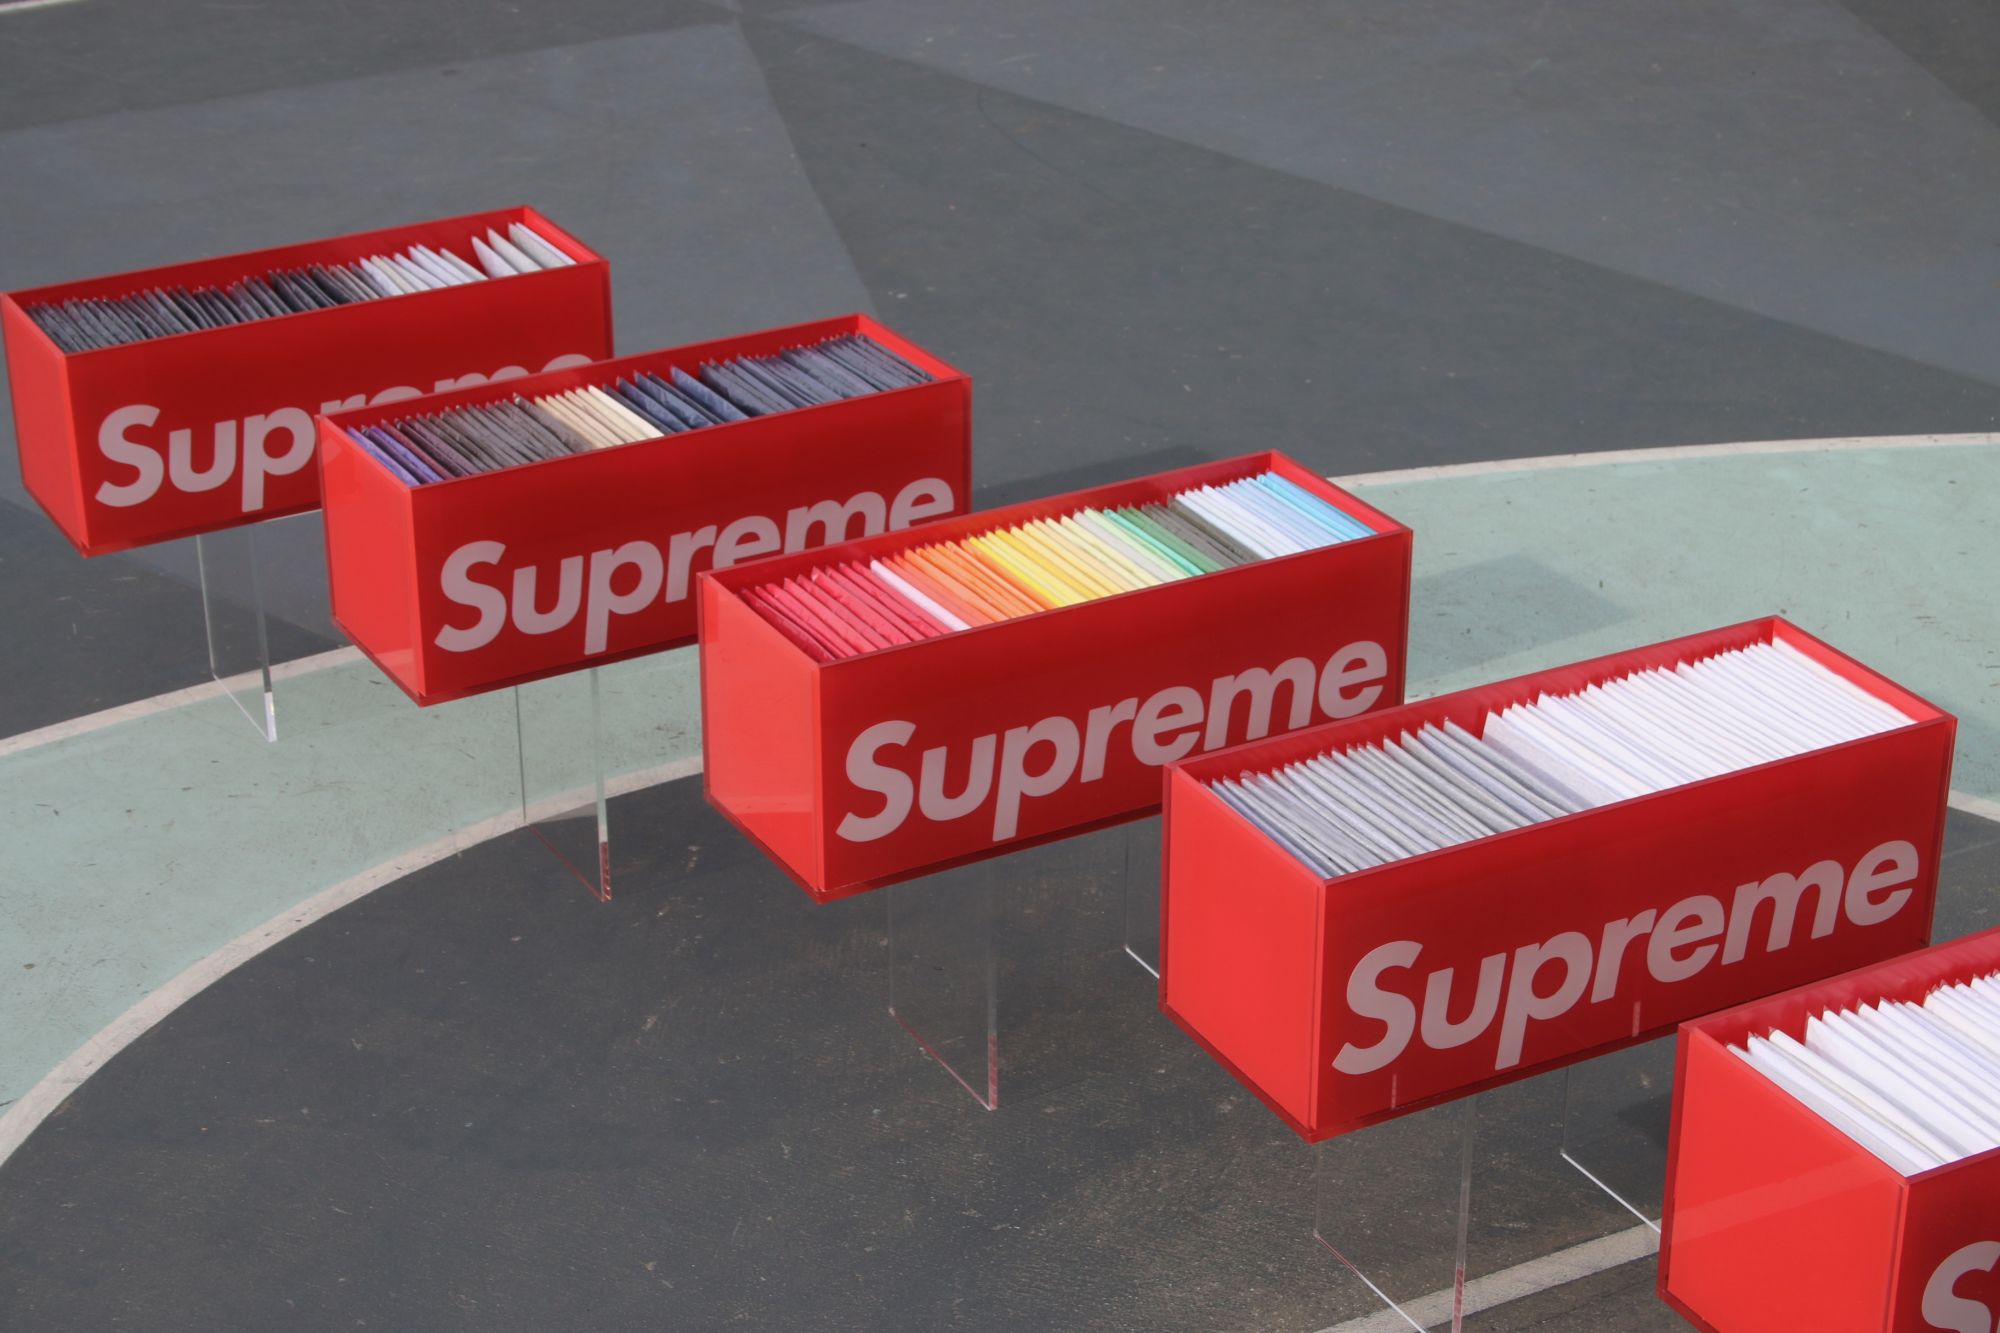 Supreme Is the Most Valuable Brand on the Resale Market, Study Says